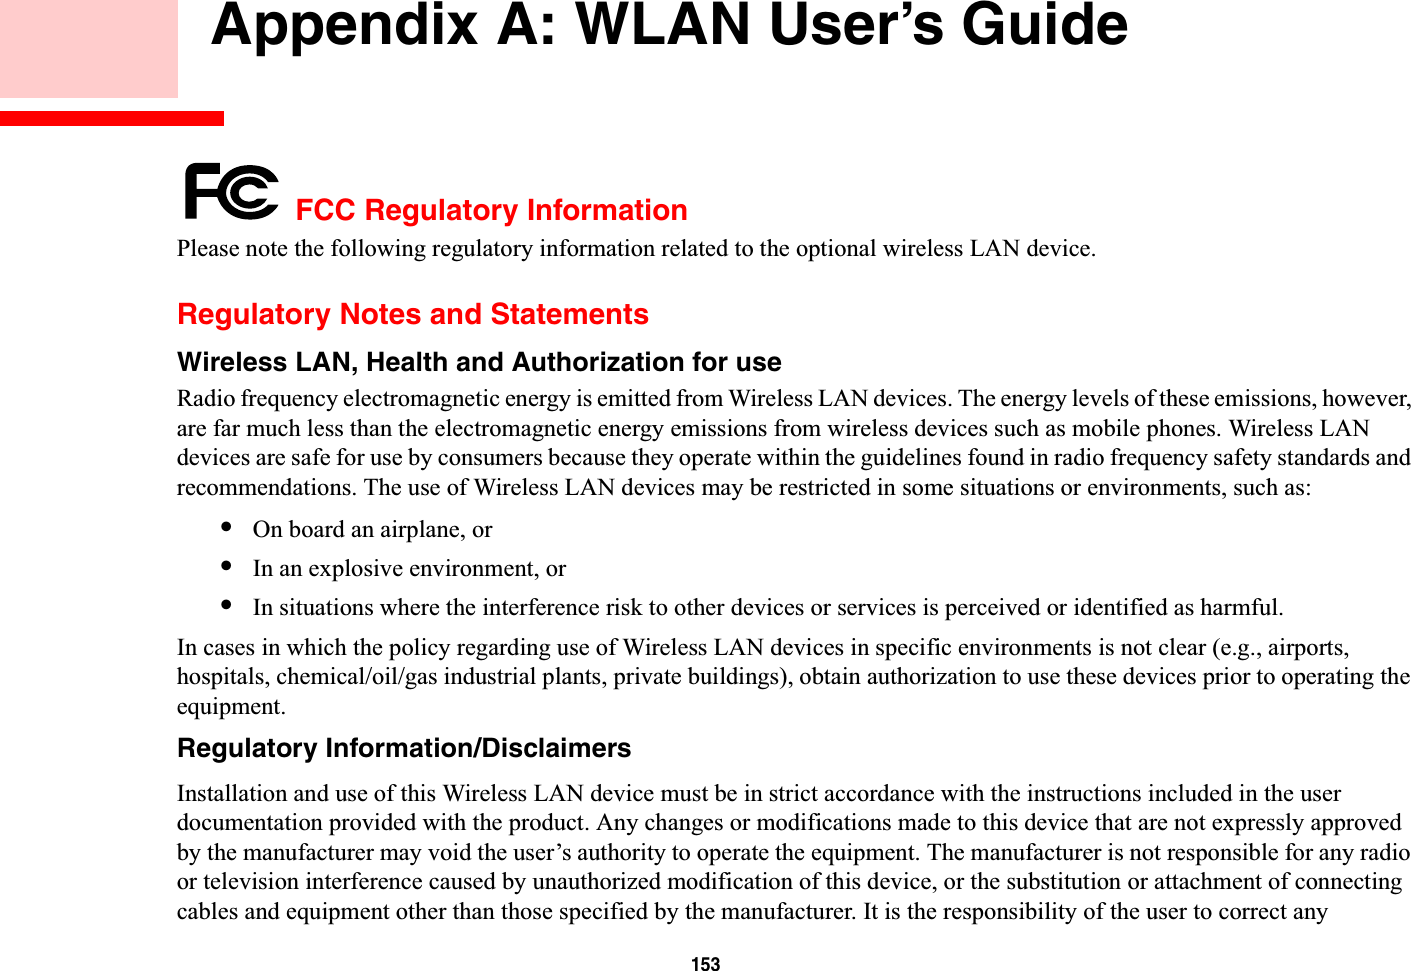 153 Appendix A: WLAN User’s Guide FCC Regulatory InformationPlease note the following regulatory information related to the optional wireless LAN device.Regulatory Notes and StatementsWireless LAN, Health and Authorization for use Radio frequency electromagnetic energy is emitted from Wireless LAN devices. The energy levels of these emissions, however, are far much less than the electromagnetic energy emissions from wireless devices such as mobile phones. Wireless LAN devices are safe for use by consumers because they operate within the guidelines found in radio frequency safety standards and recommendations. The use of Wireless LAN devices may be restricted in some situations or environments, such as:•On board an airplane, or•In an explosive environment, or•In situations where the interference risk to other devices or services is perceived or identified as harmful.In cases in which the policy regarding use of Wireless LAN devices in specific environments is not clear (e.g., airports, hospitals, chemical/oil/gas industrial plants, private buildings), obtain authorization to use these devices prior to operating the equipment.Regulatory Information/DisclaimersInstallation and use of this Wireless LAN device must be in strict accordance with the instructions included in the user documentation provided with the product. Any changes or modifications made to this device that are not expressly approved by the manufacturer may void the user’s authority to operate the equipment. The manufacturer is not responsible for any radio or television interference caused by unauthorized modification of this device, or the substitution or attachment of connecting cables and equipment other than those specified by the manufacturer. It is the responsibility of the user to correct any 